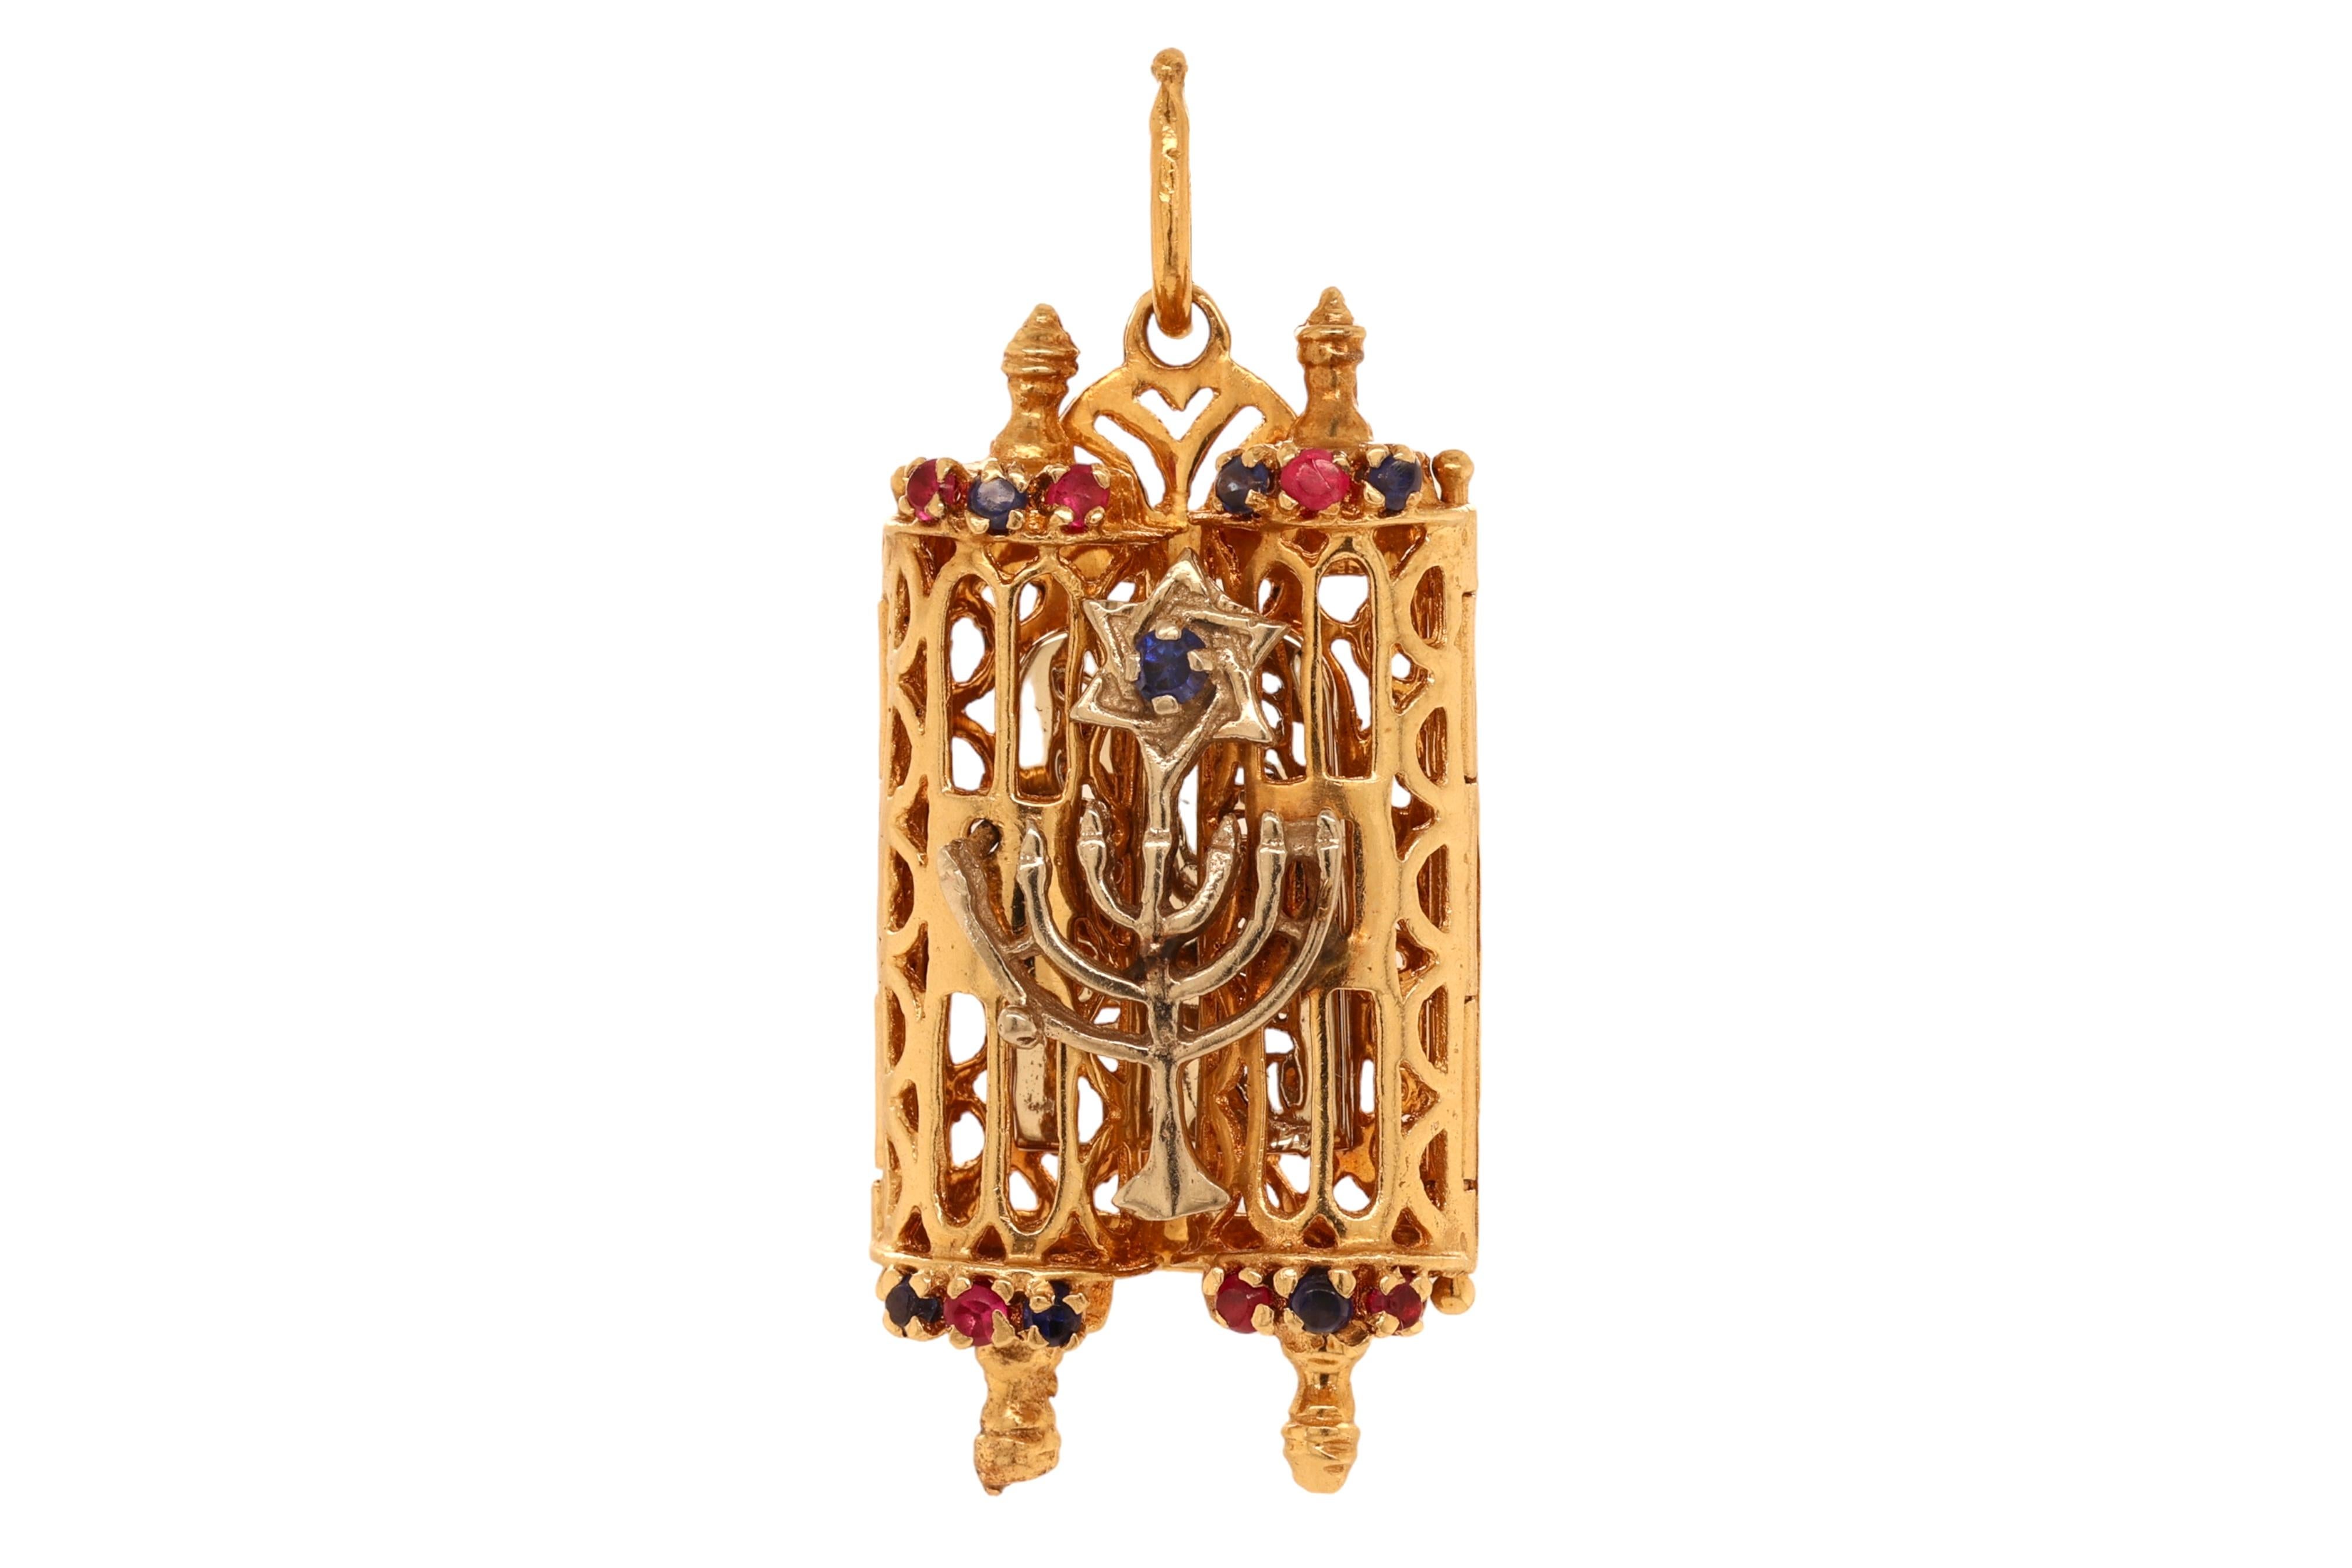 Vintage 14 kt. Gold Judaica Torah Scroll Pendant Holder With Menorah and Star of David, 10 Commandments

Sapphire: 7 little round sapphires

Ruby: 6 little round rubies

Material: 14kt yellow gold

Measurements: 44.8 mm x 19.7 mm x 7.1 mm

Total